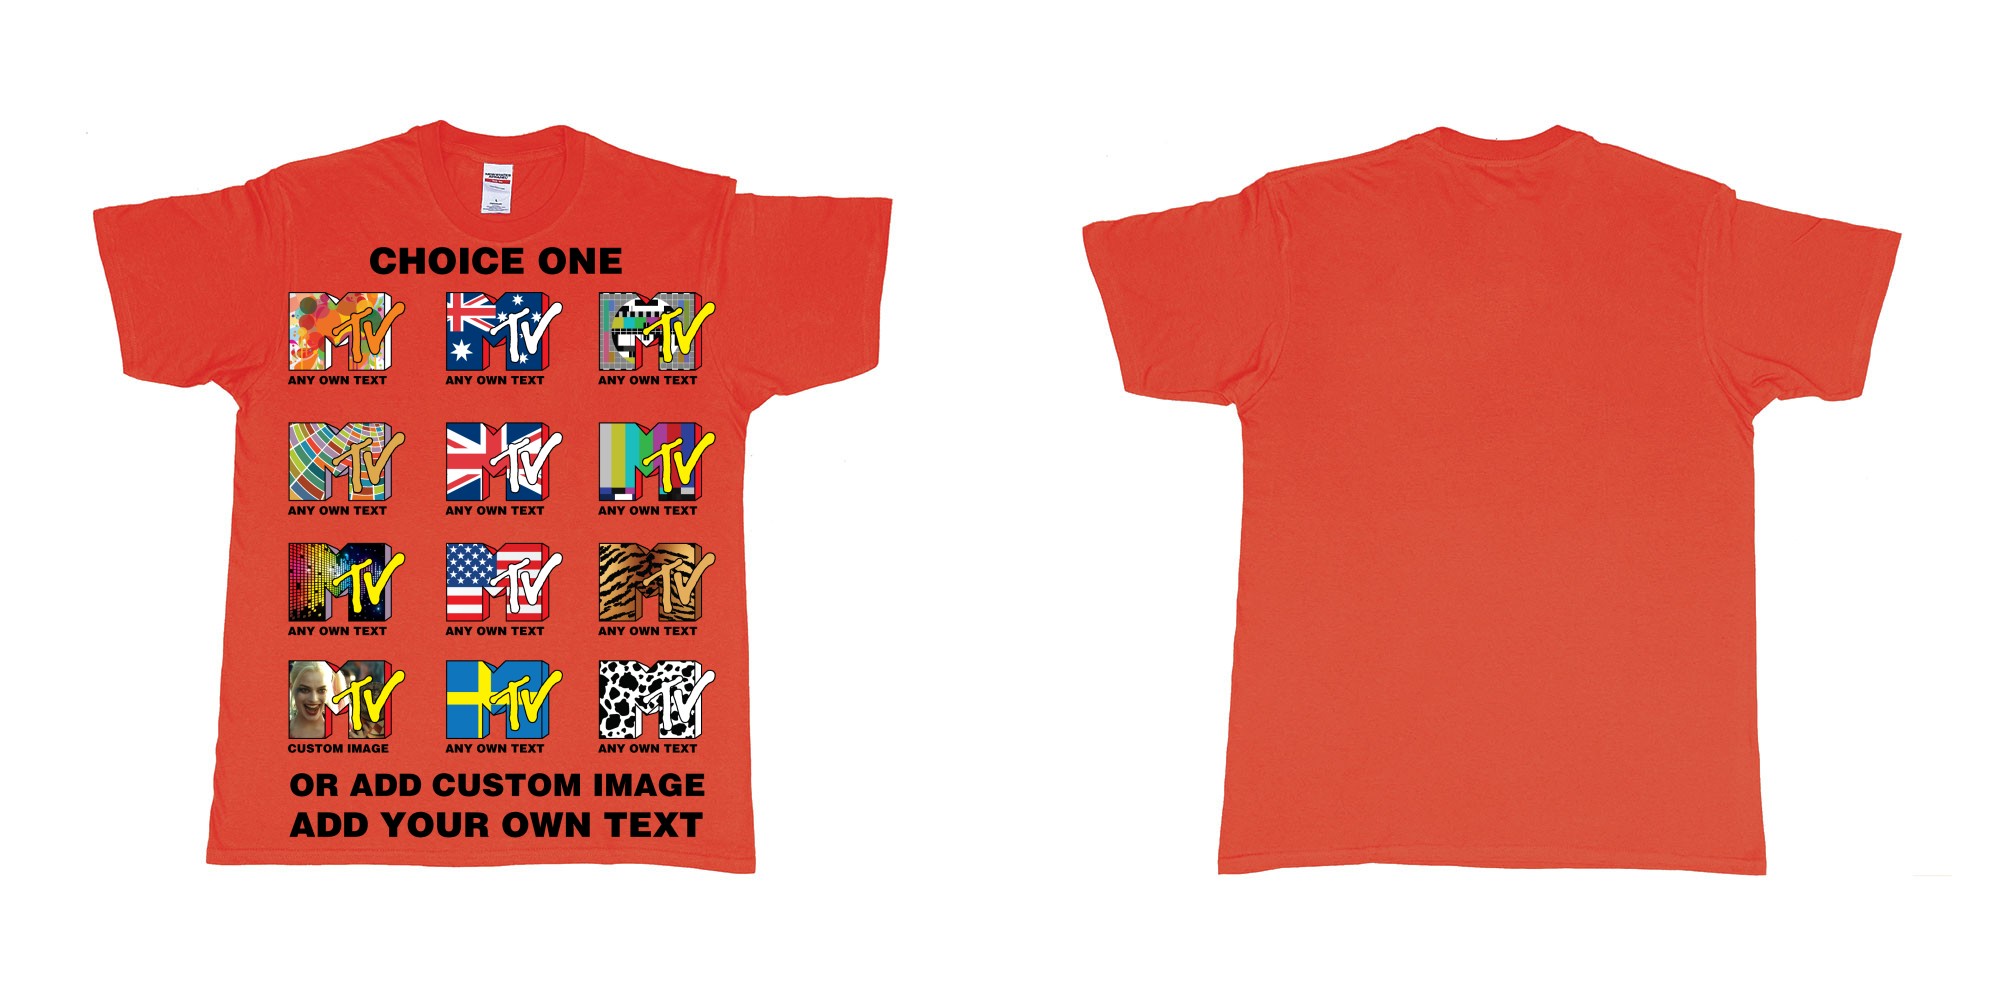 Custom tshirt design mtv logo choice any background text print in fabric color red choice your own text made in Bali by The Pirate Way